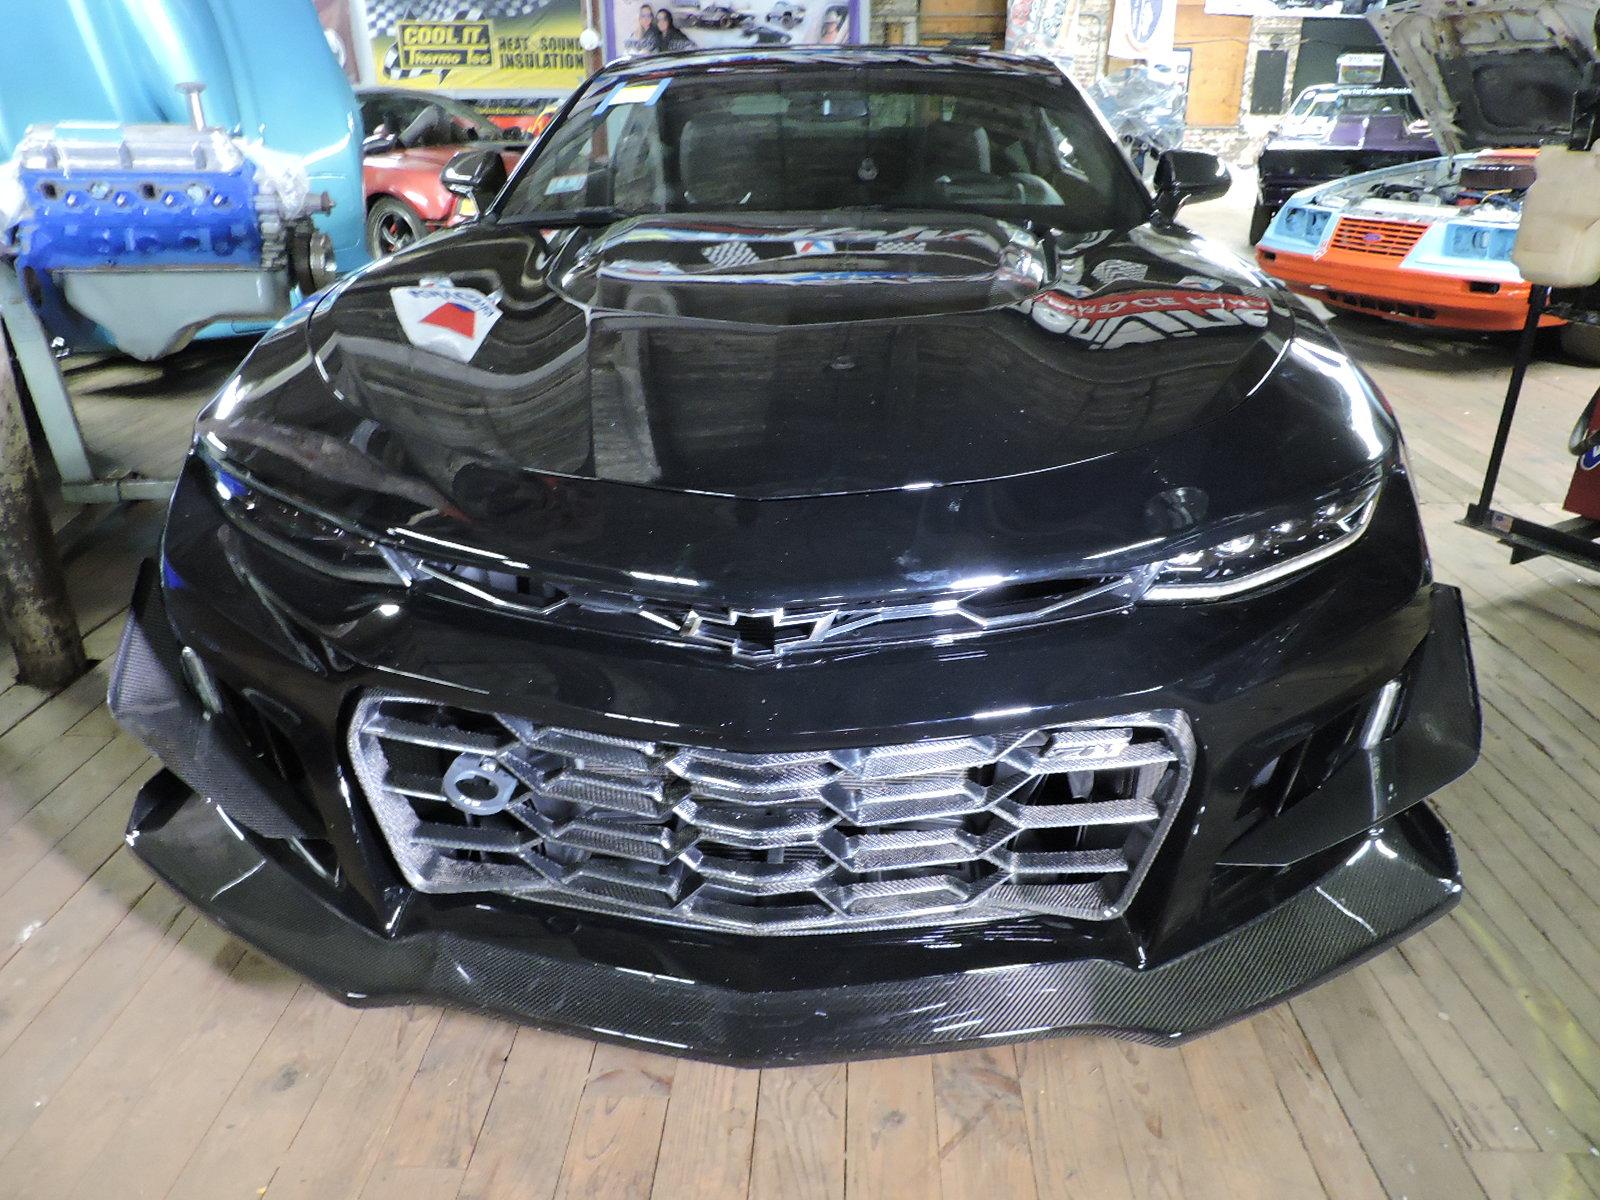 Highly Modified 2018 Chevrolet Camaro ZL1 - 850 HP - Track Ready / Street Legal - NEW PICS & VIDEO